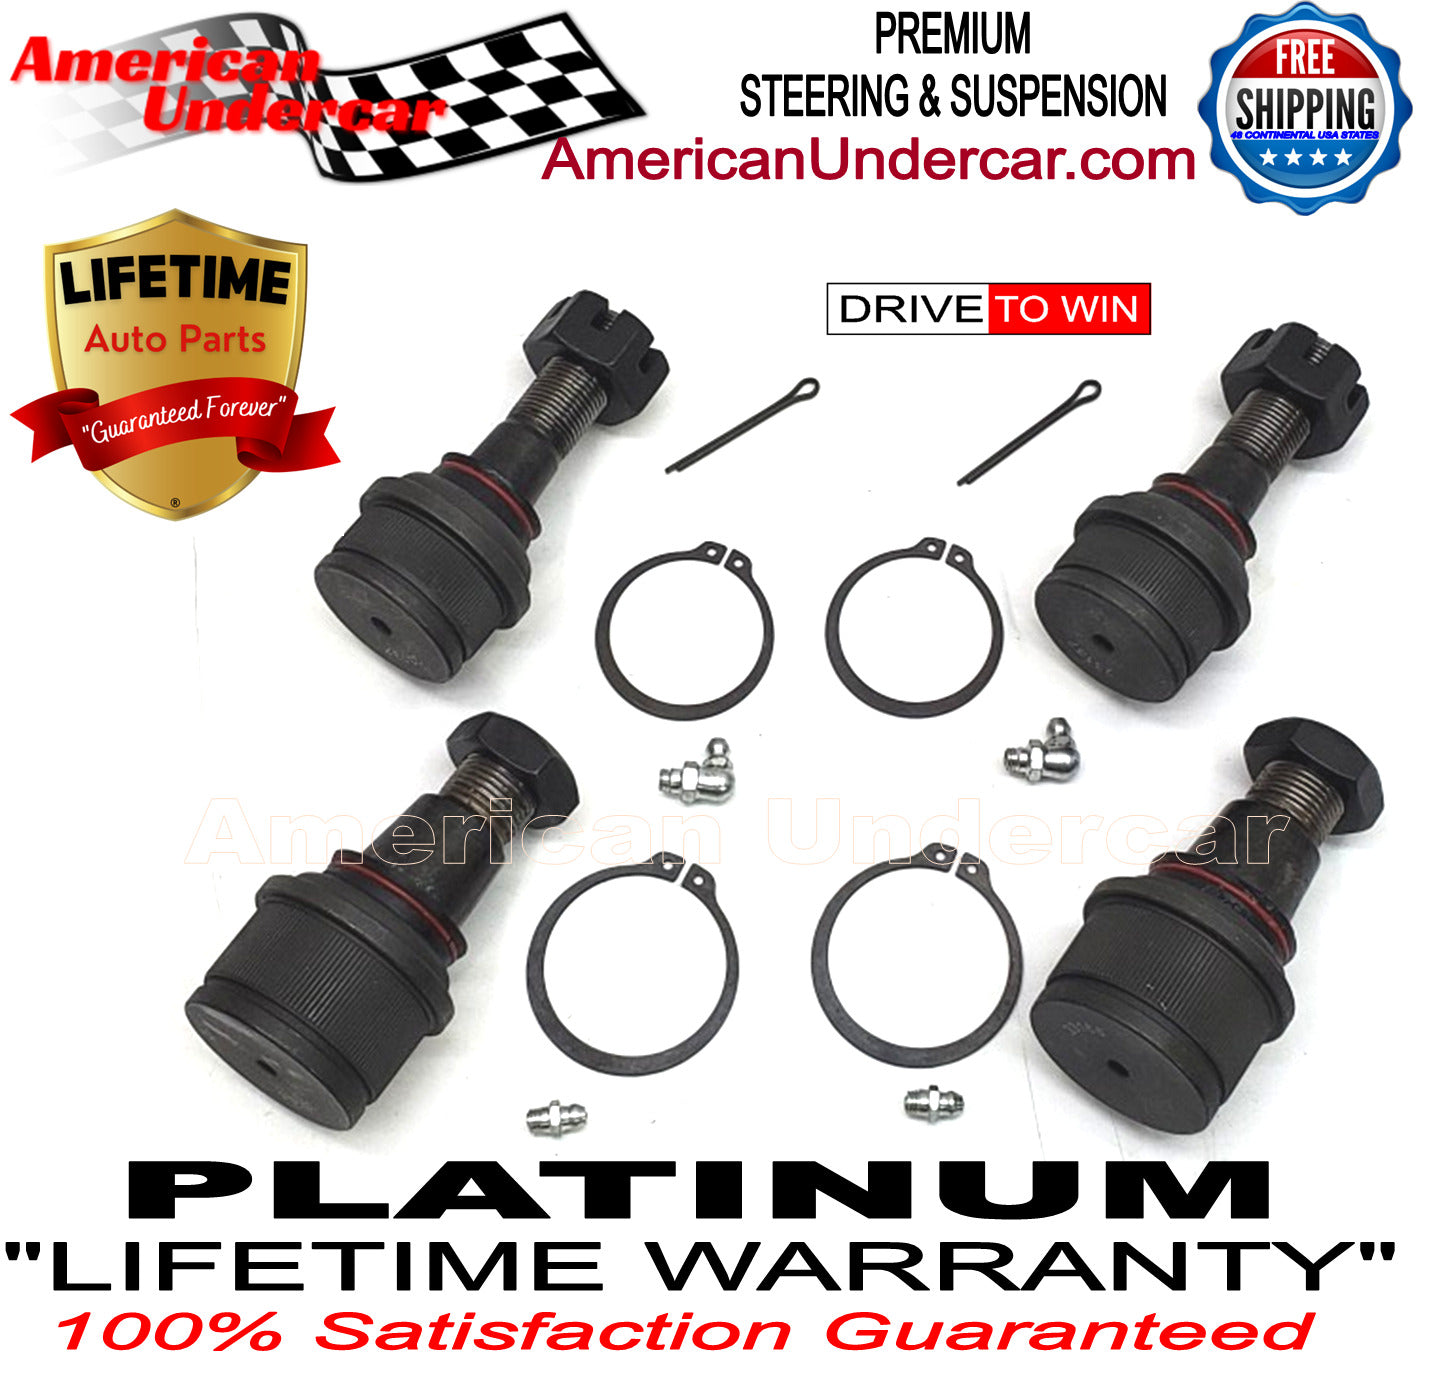 Lifetime Ball Joint Suspension Kit for 1985-1994 Ford F250 4x4 4600lb Axle